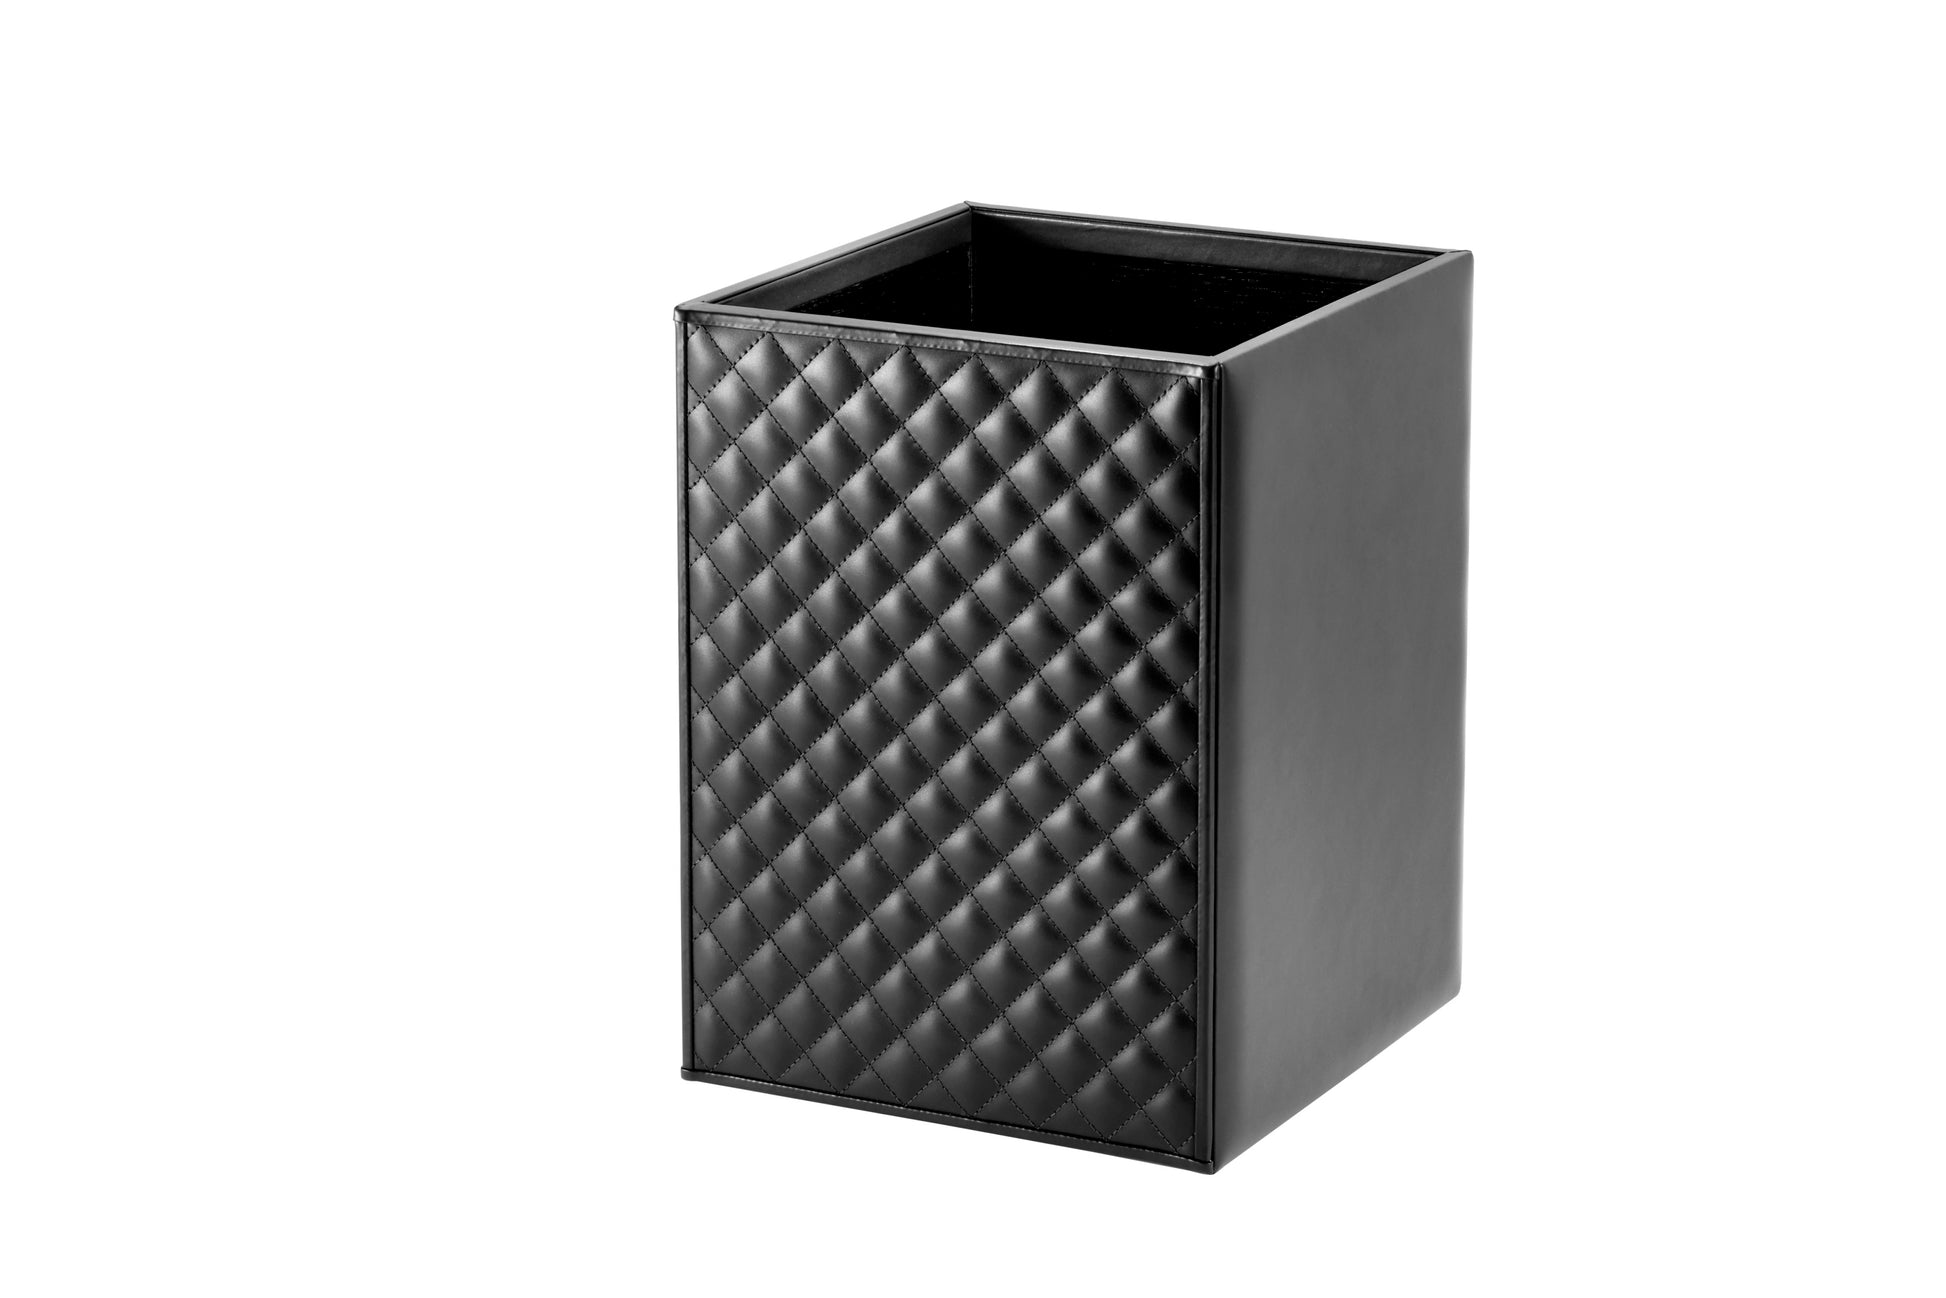 Riviere Ivo Diamonds Leather Wastepaper Bin | Luxury Home Accessories, Elegant Waste Disposal & Decorative Items | 2Jour Concierge, #1 luxury high-end gift & lifestyle shop